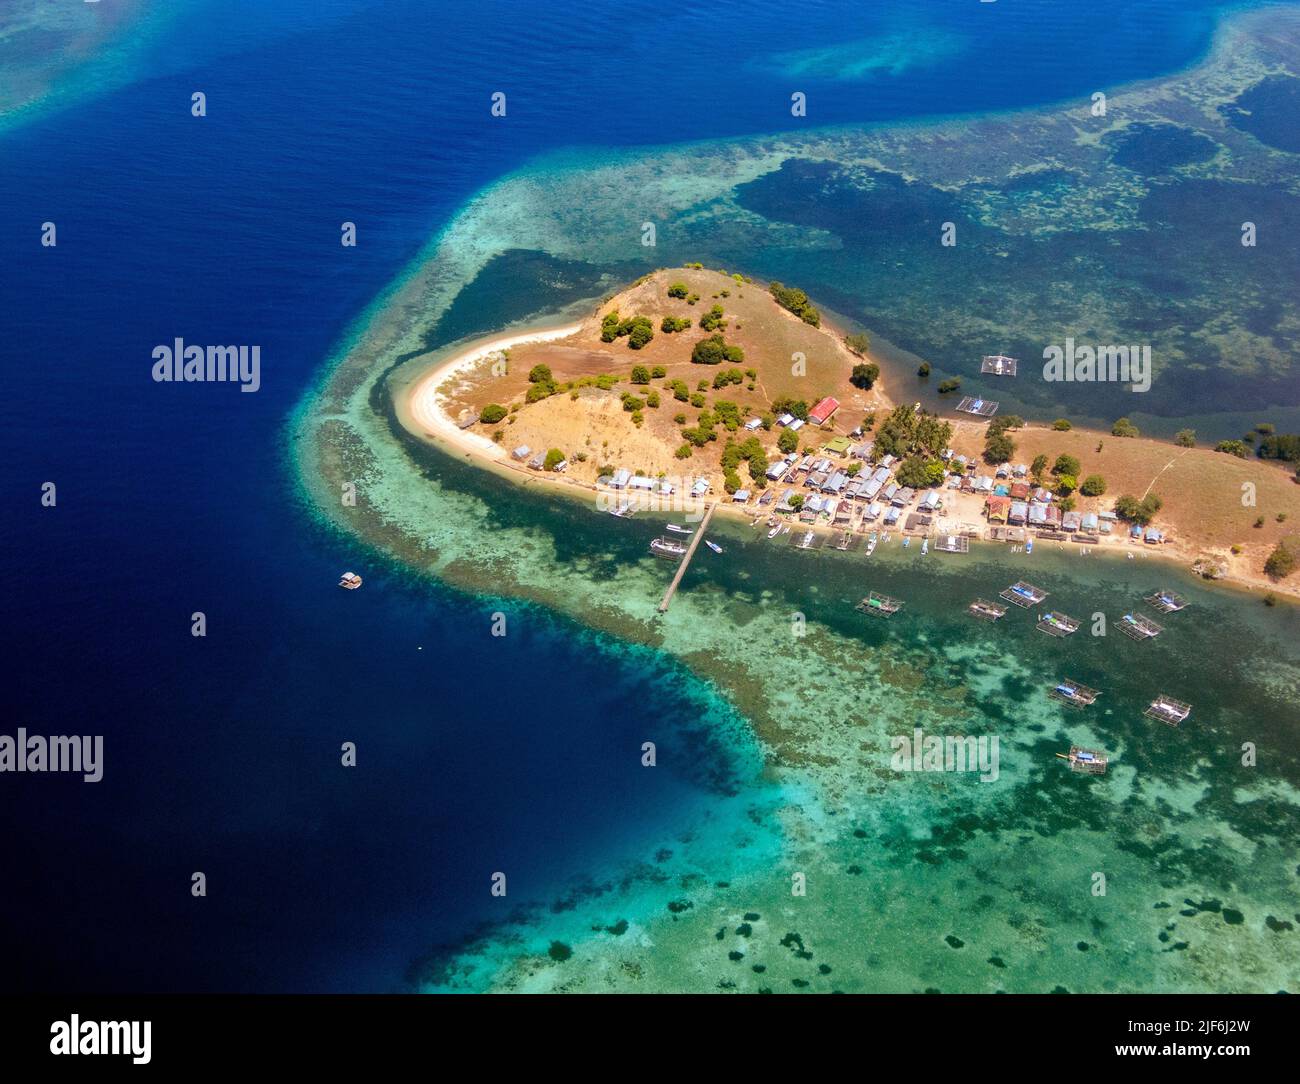 Fishery settlement on a small islet off Labuan Bajo, Nussa Tenggara Timur, Indonesia. Here people live on and off the coral reefs. Stock Photo